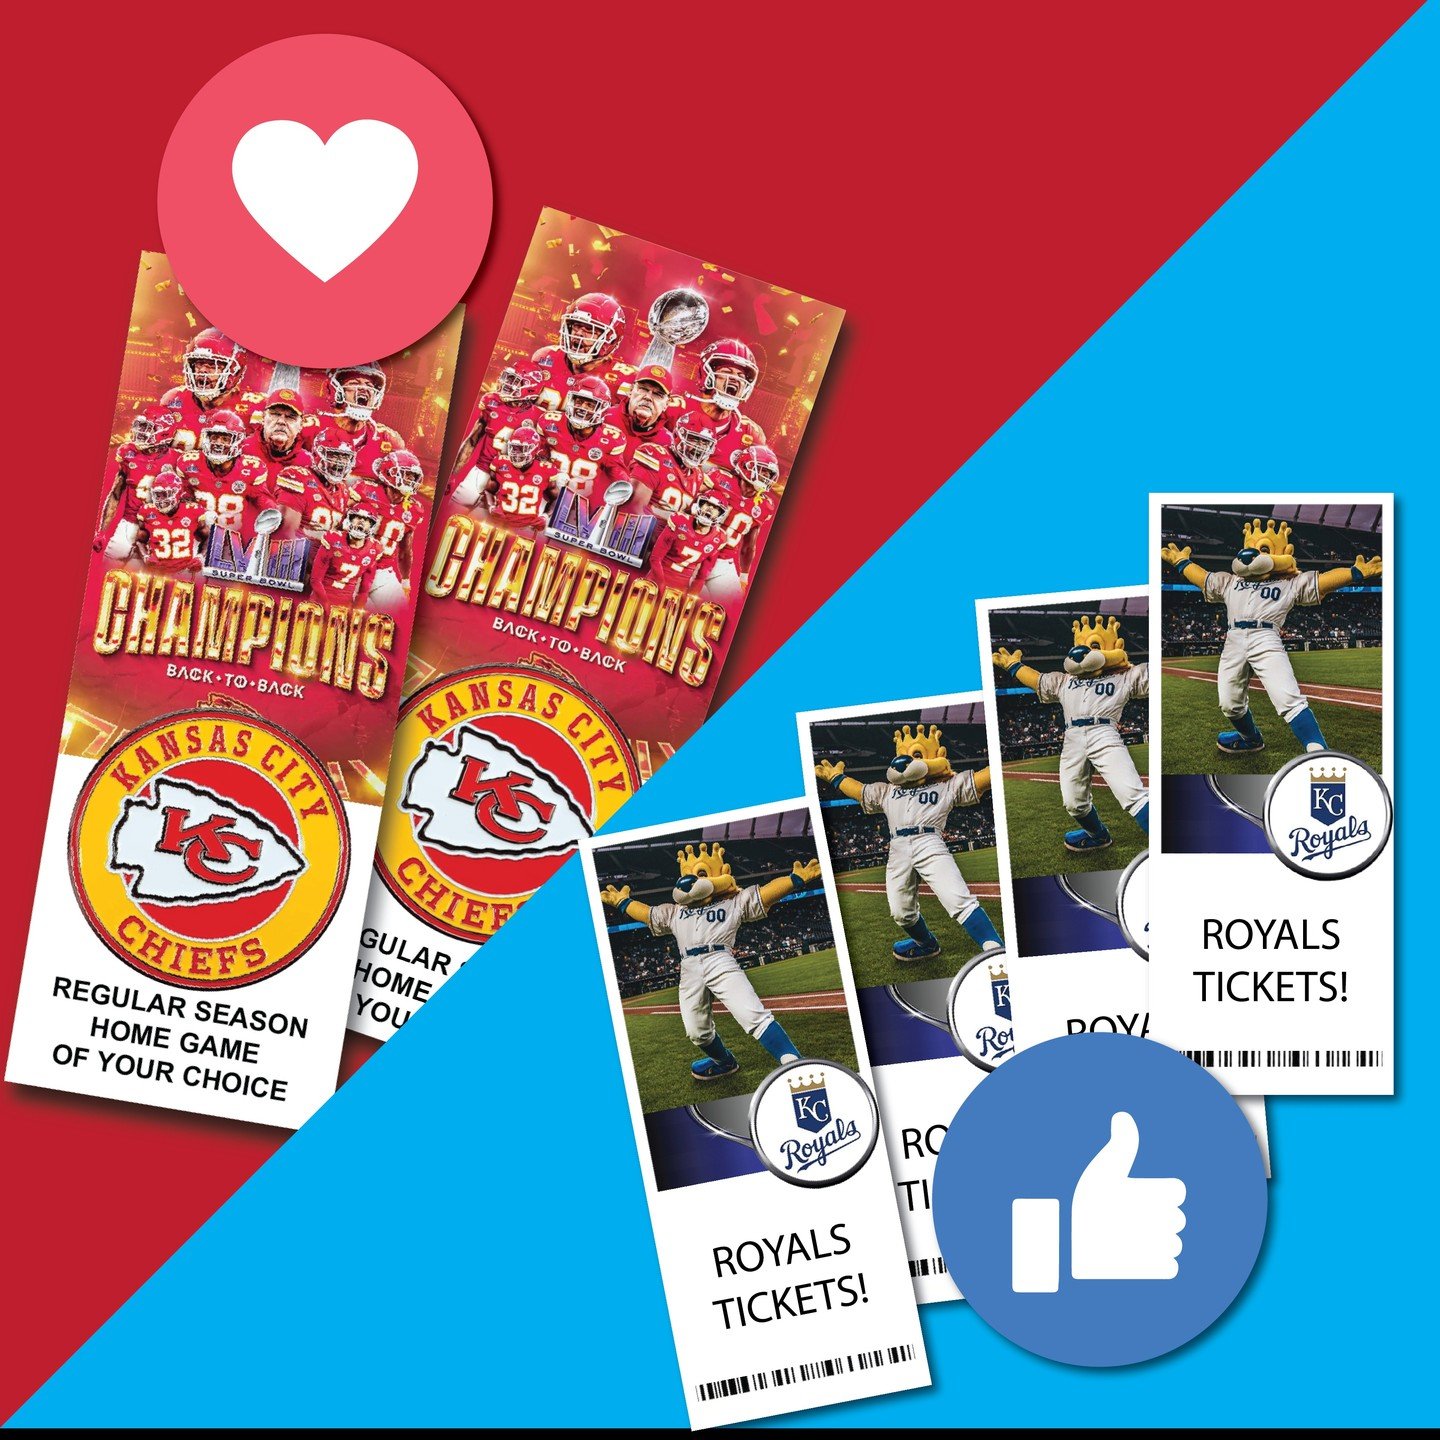 Summer of Smart Rewards is starting SOON! And we will have a few drawings for tickets! What are you watching to see if you win? Royals tickets or Chiefs tickets?